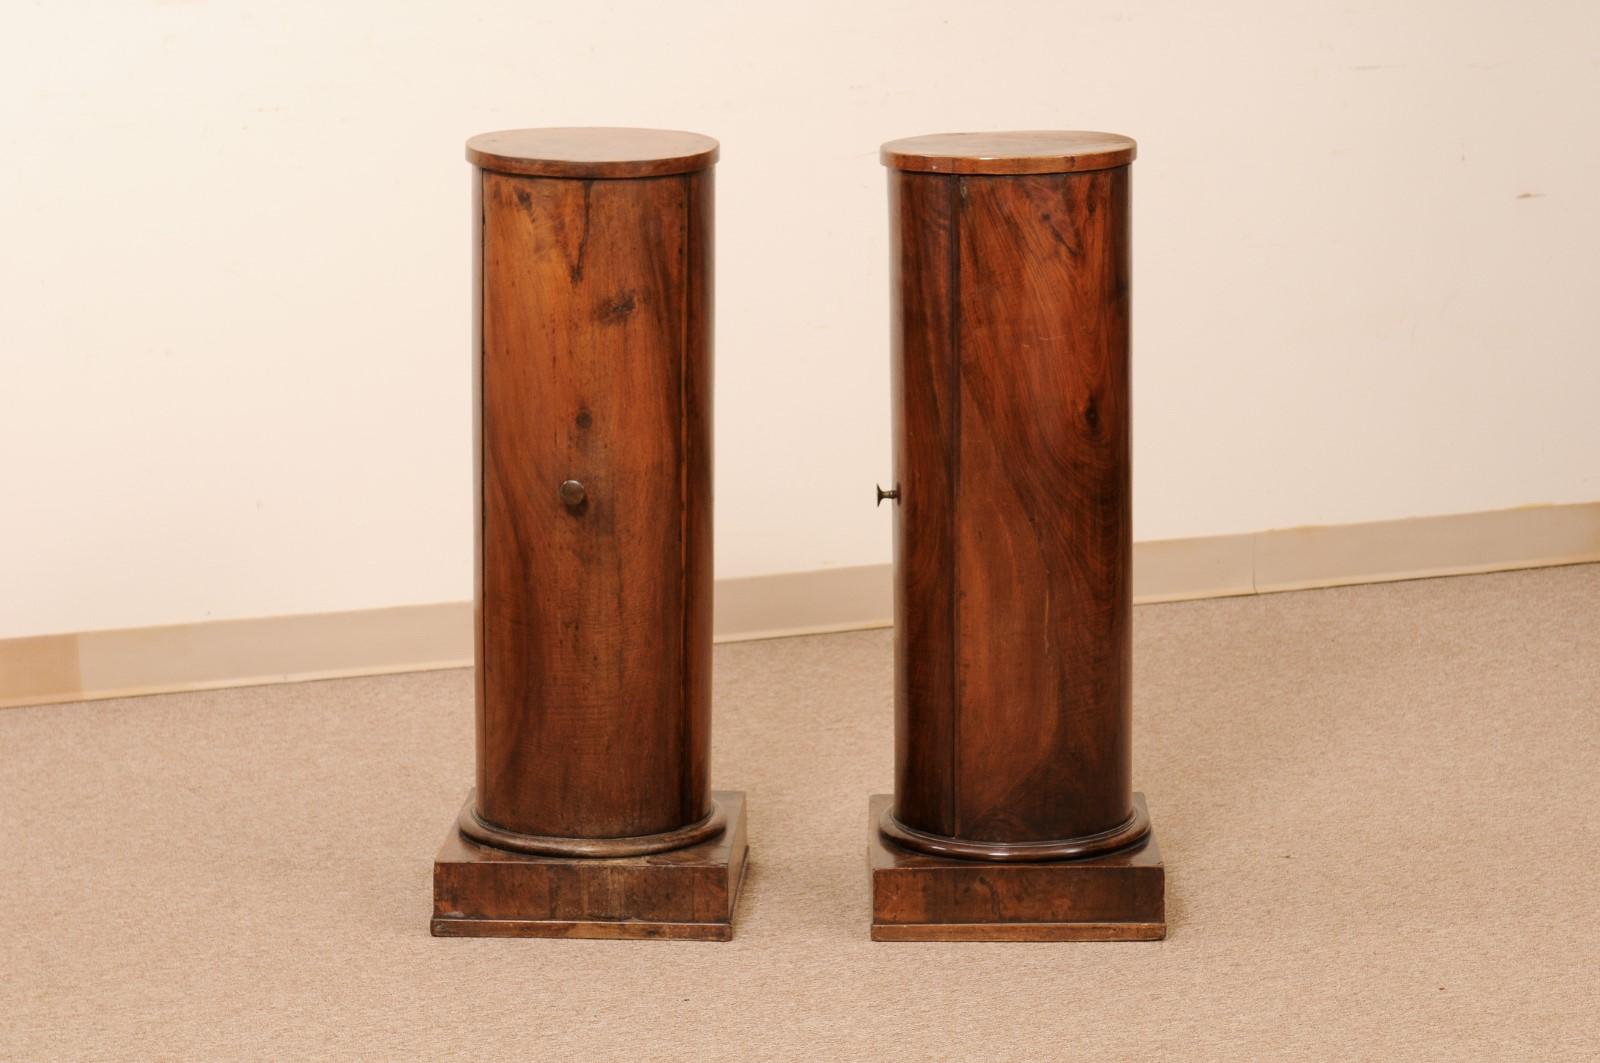 Pair of Early 19th Century Italian Neoclassical Walnut Pedestal Cabinets For Sale 8